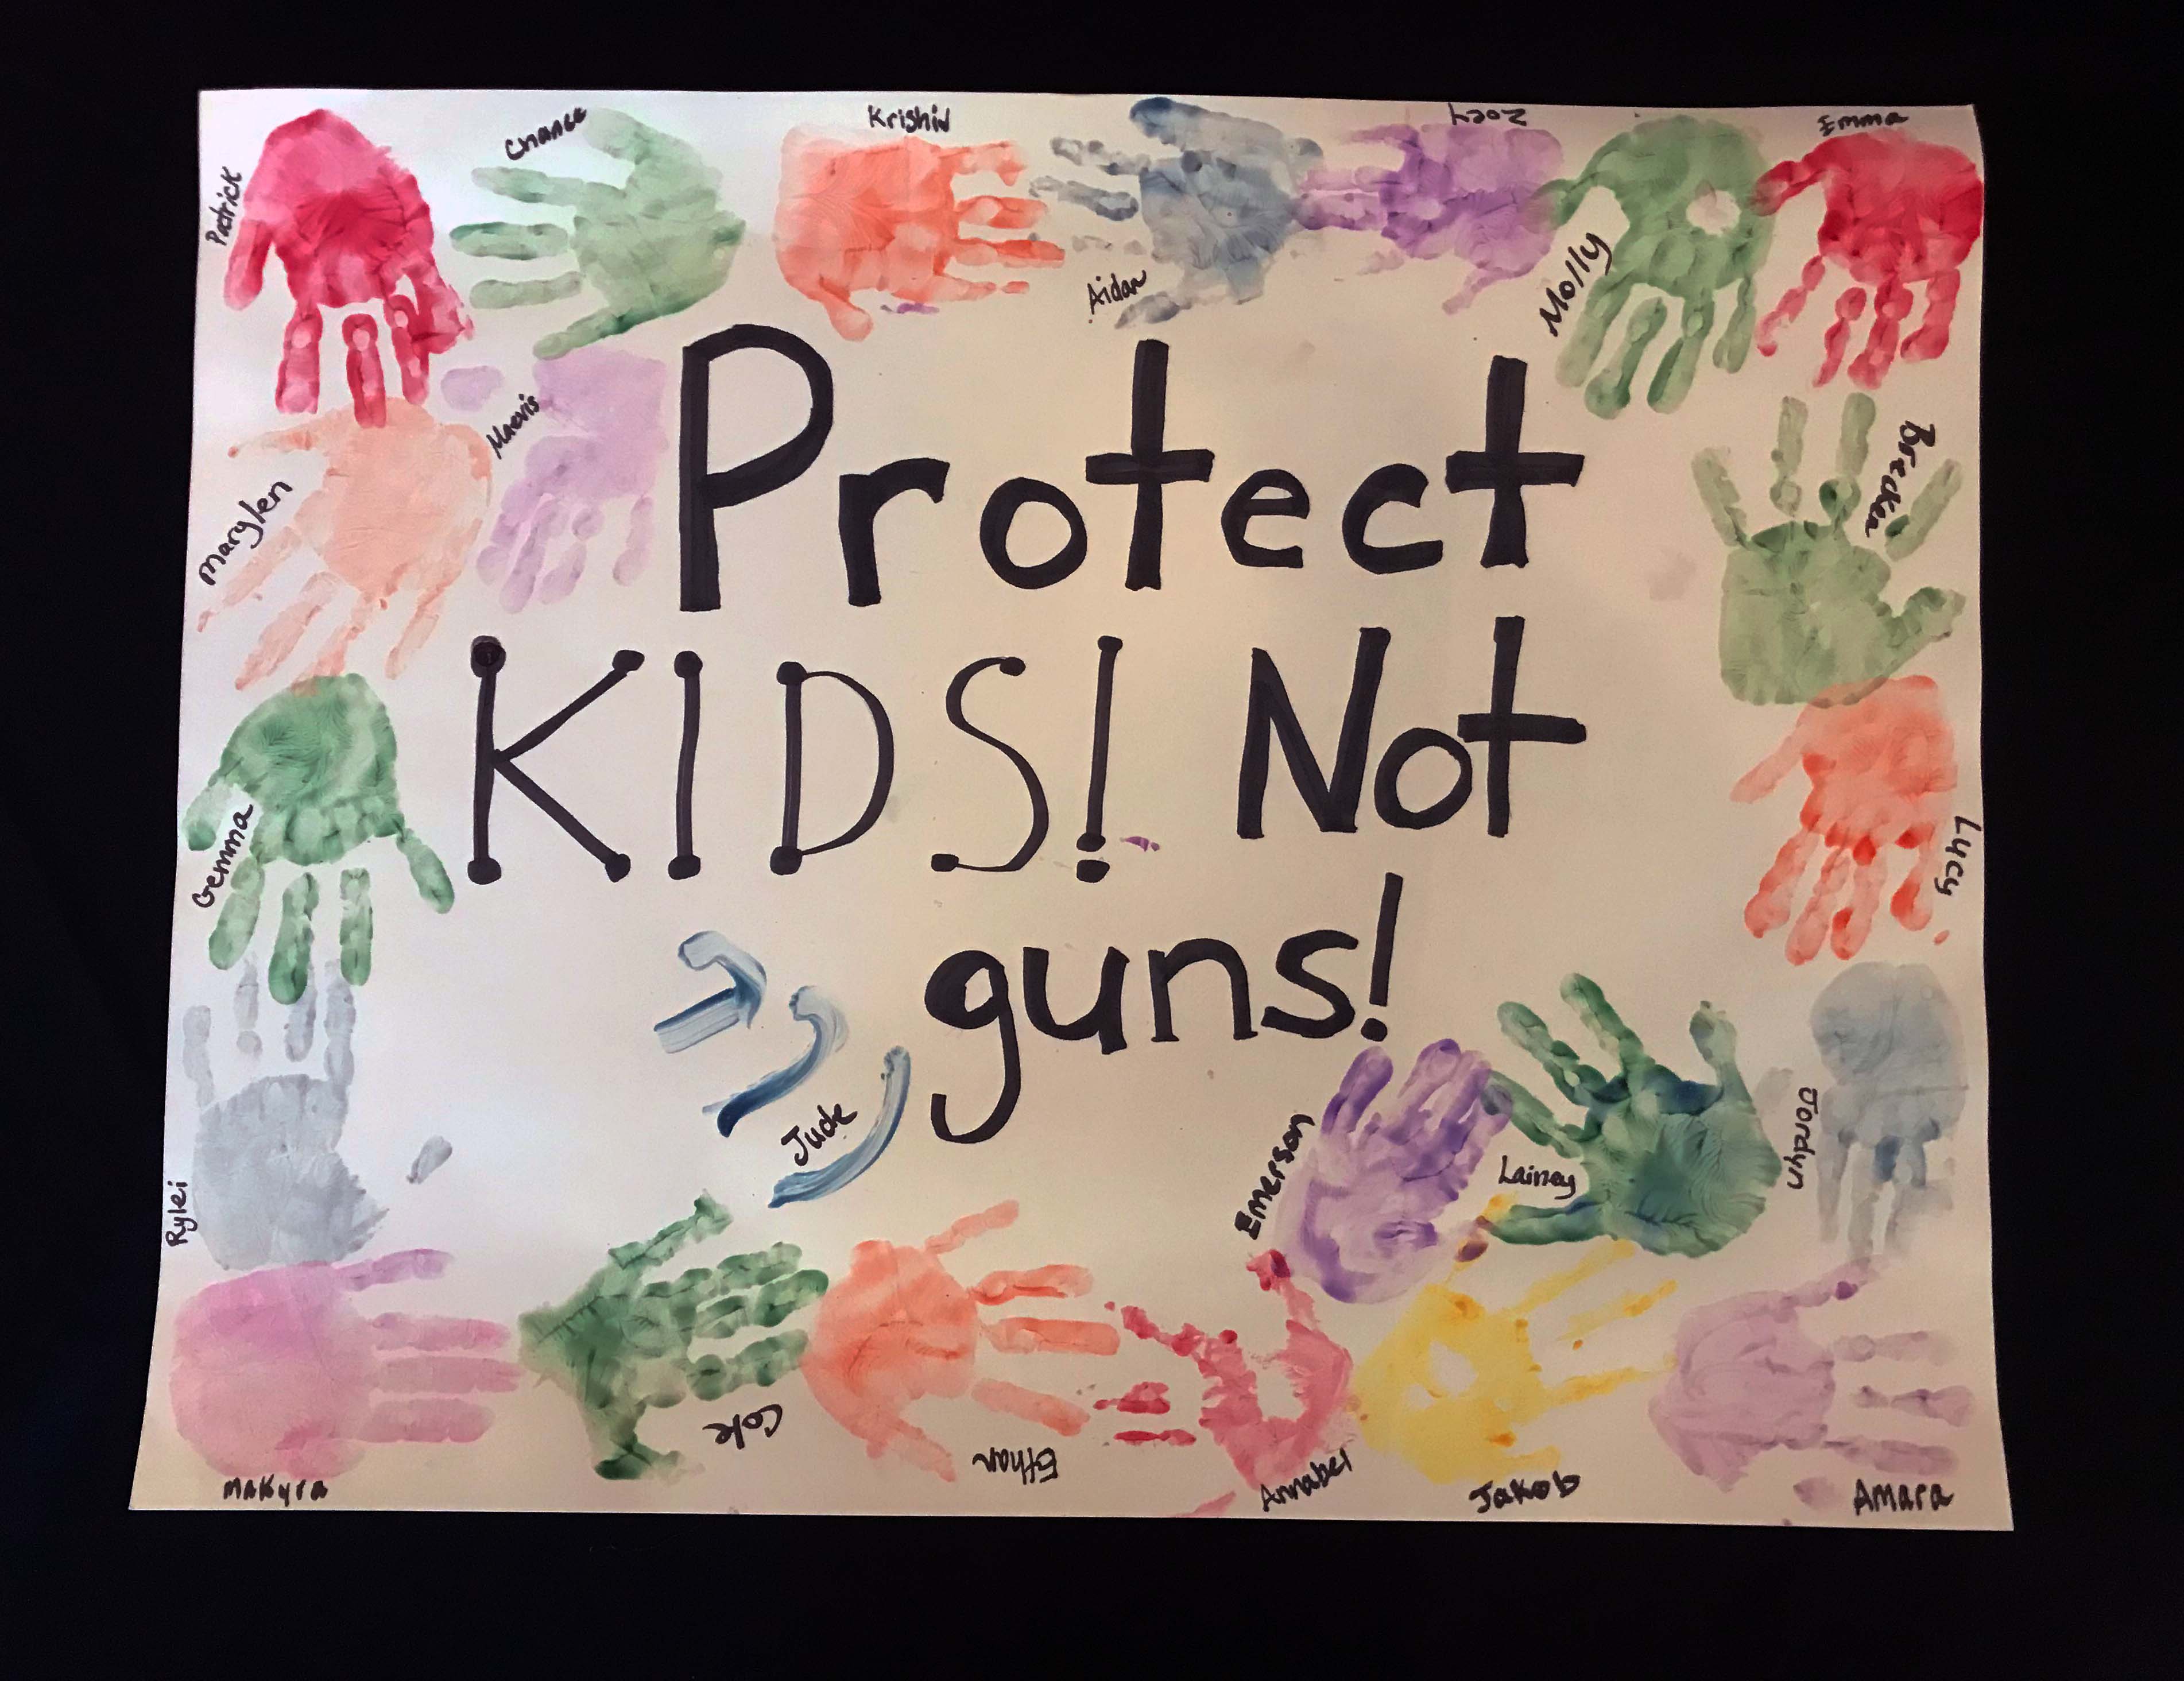 Charlotte March for Our Lives, 2018. Sign reads: "Protect kids! Not guns!"